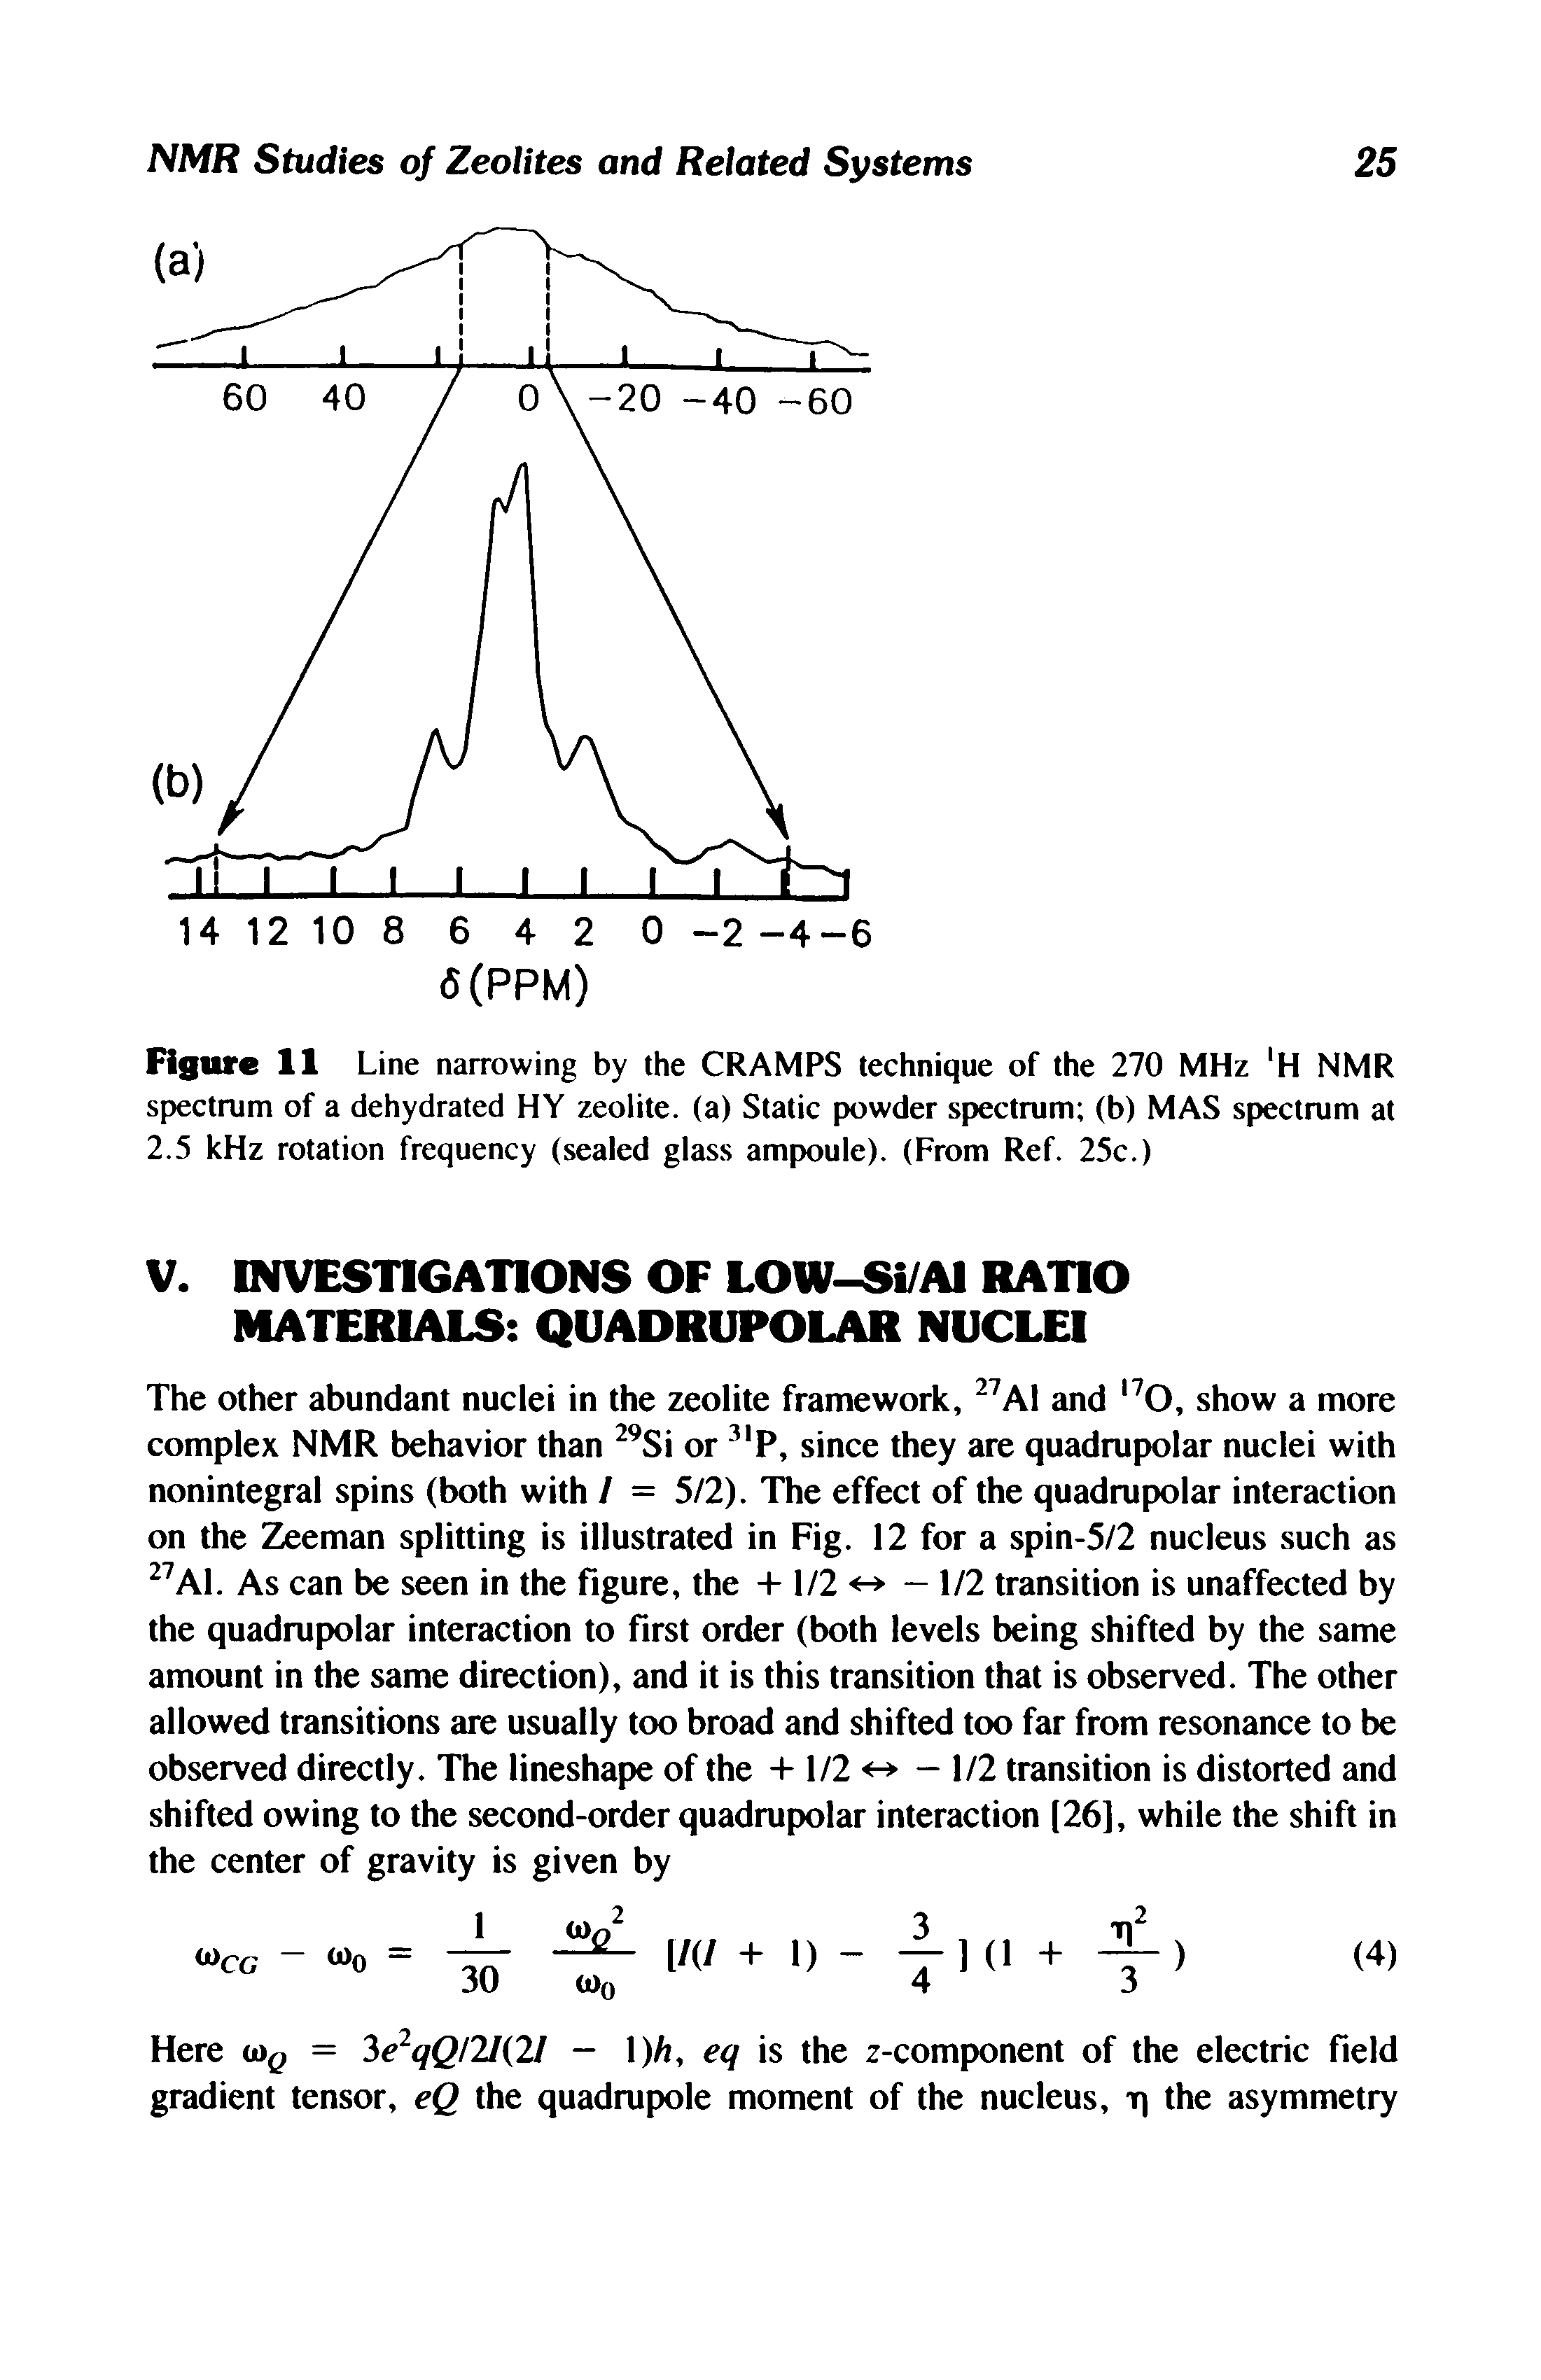 Figure 11 Line narrowing by the CRAMPS technique of the 270 MHz H NMR spectrum of a dehydrated HY zeolite, (a) Static f>owder spectrum (b) MAS spectrum at 2.5 kHz rotation frequency (sealed glass ampoule). (From Ref. 25c.)...